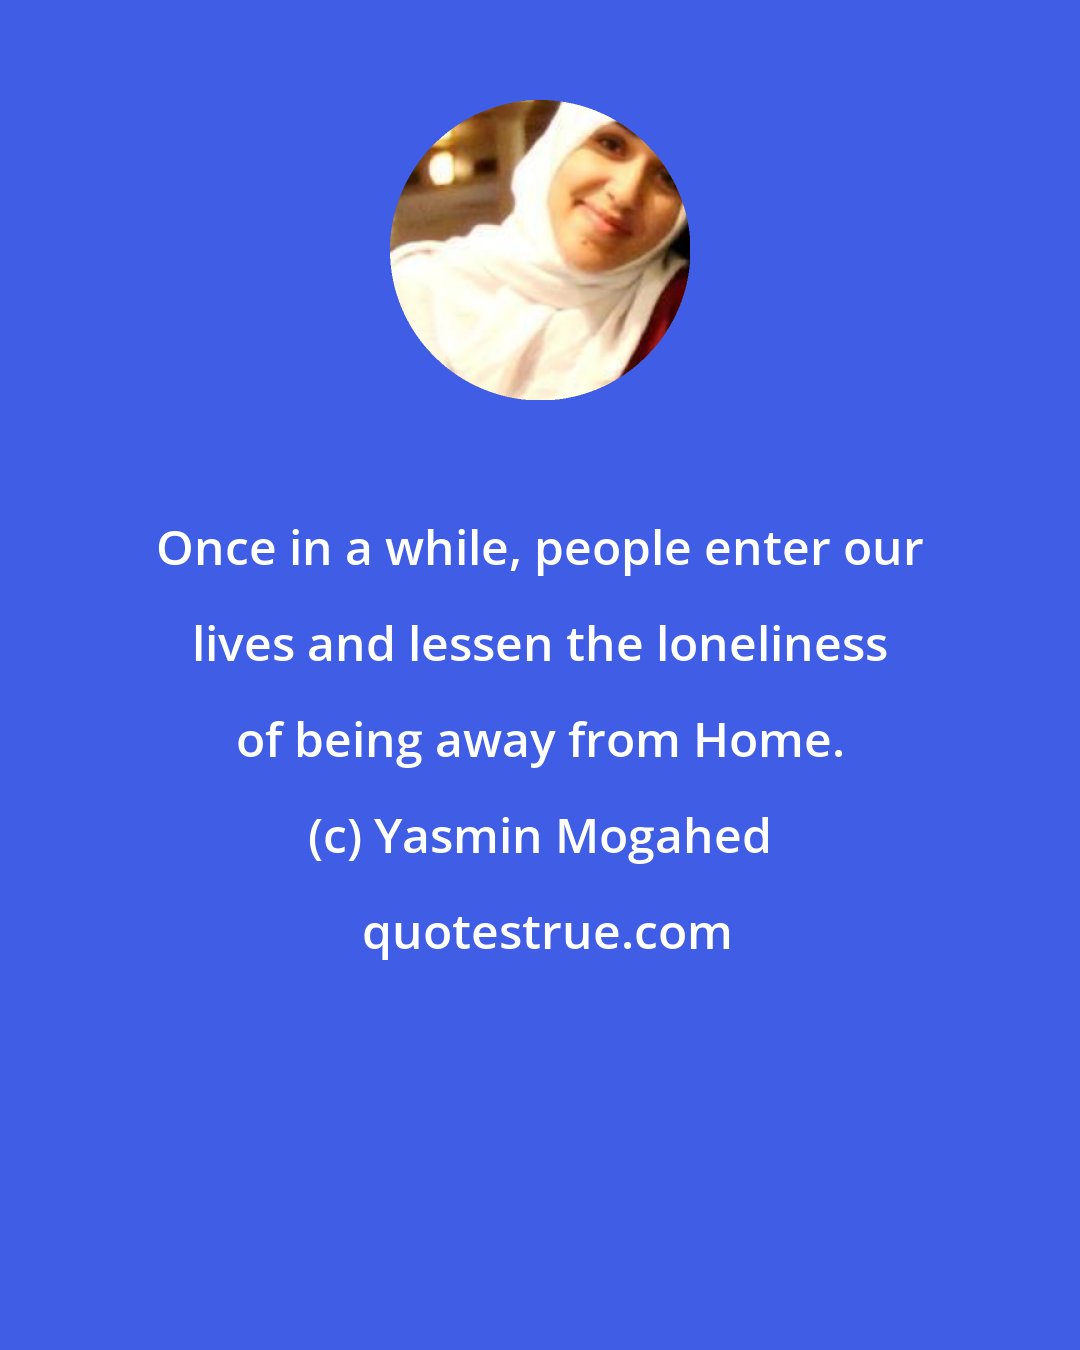 Yasmin Mogahed: Once in a while, people enter our lives and lessen the loneliness of being away from Home.